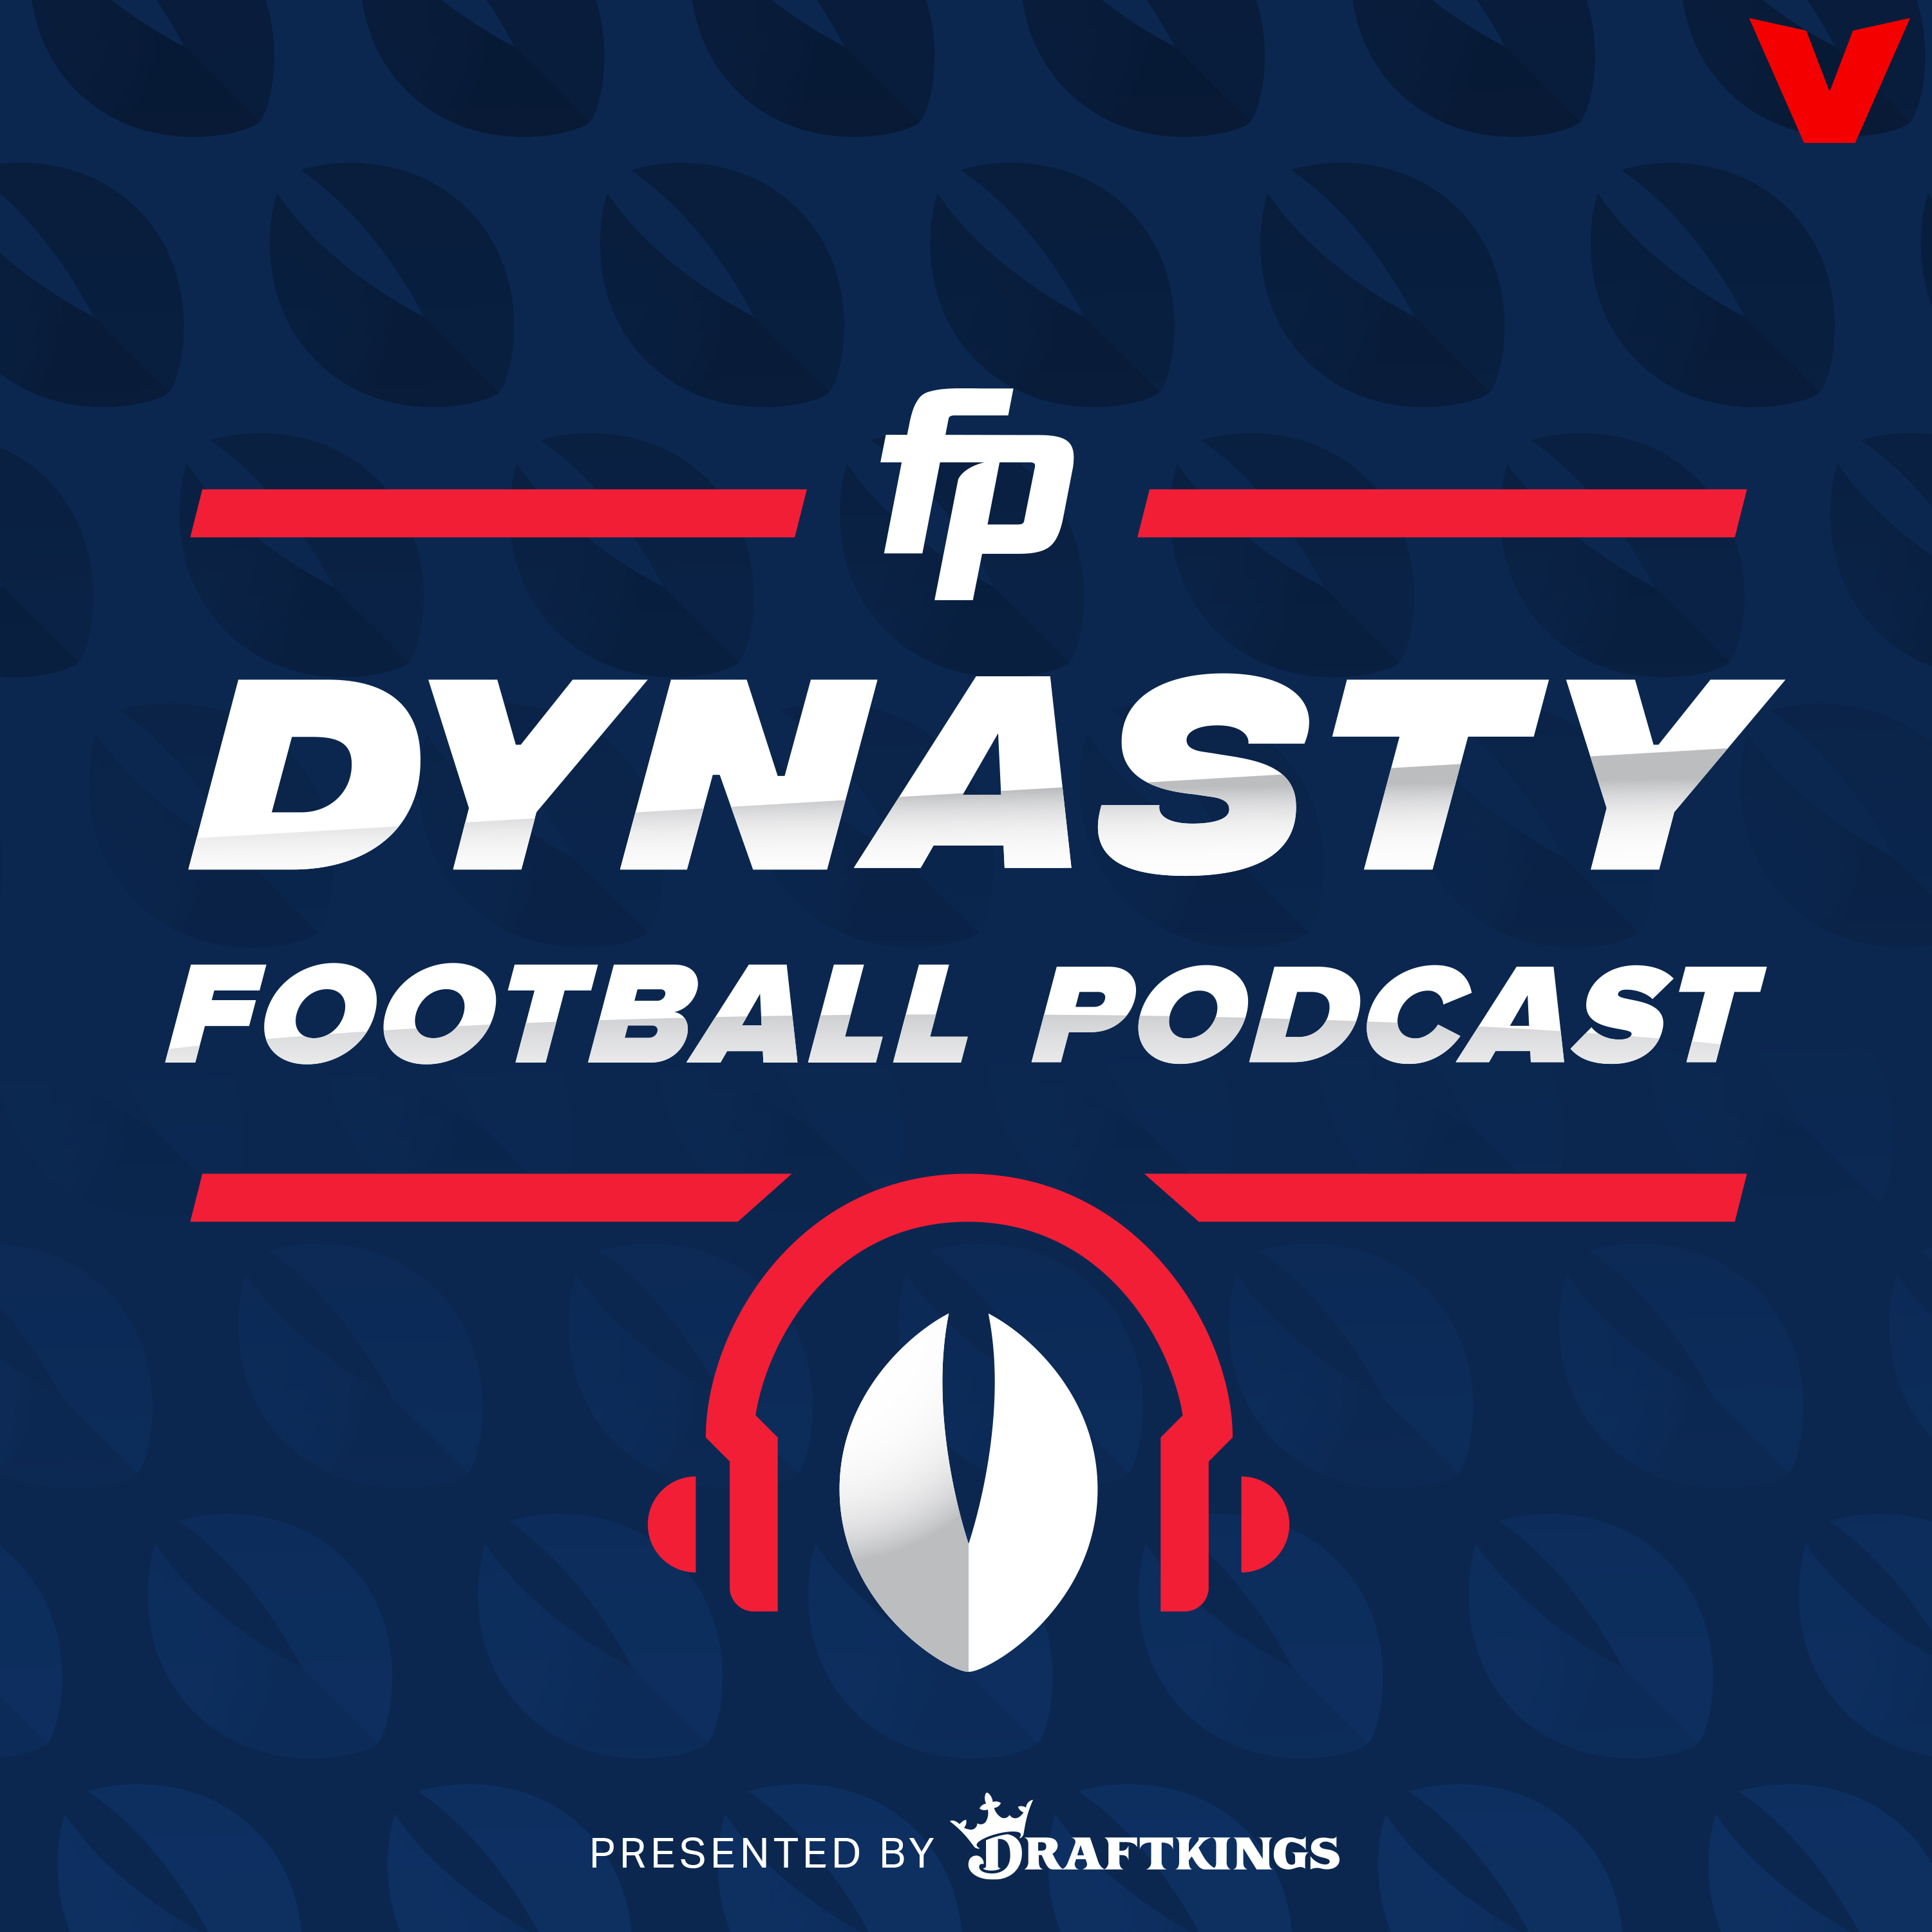 Buy Low or Sell High on These Dynasty Trade Targets Ahead of NFL Free Agency (Ep. 131)